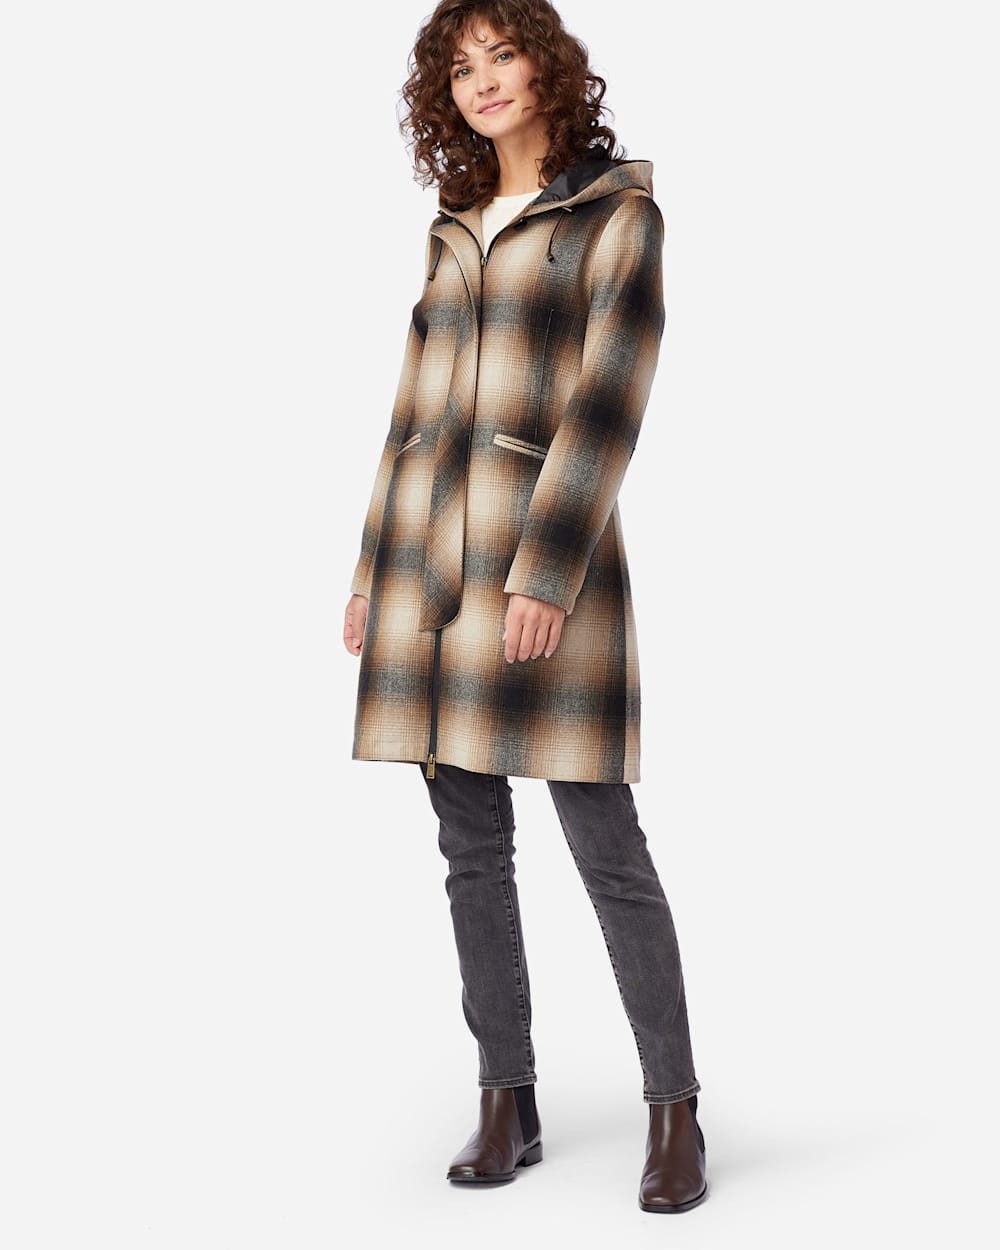 WOMEN'S STANFORD INSULATED WALKER COAT IN IVORY/BLACK/MOCHA PLAID image number 1